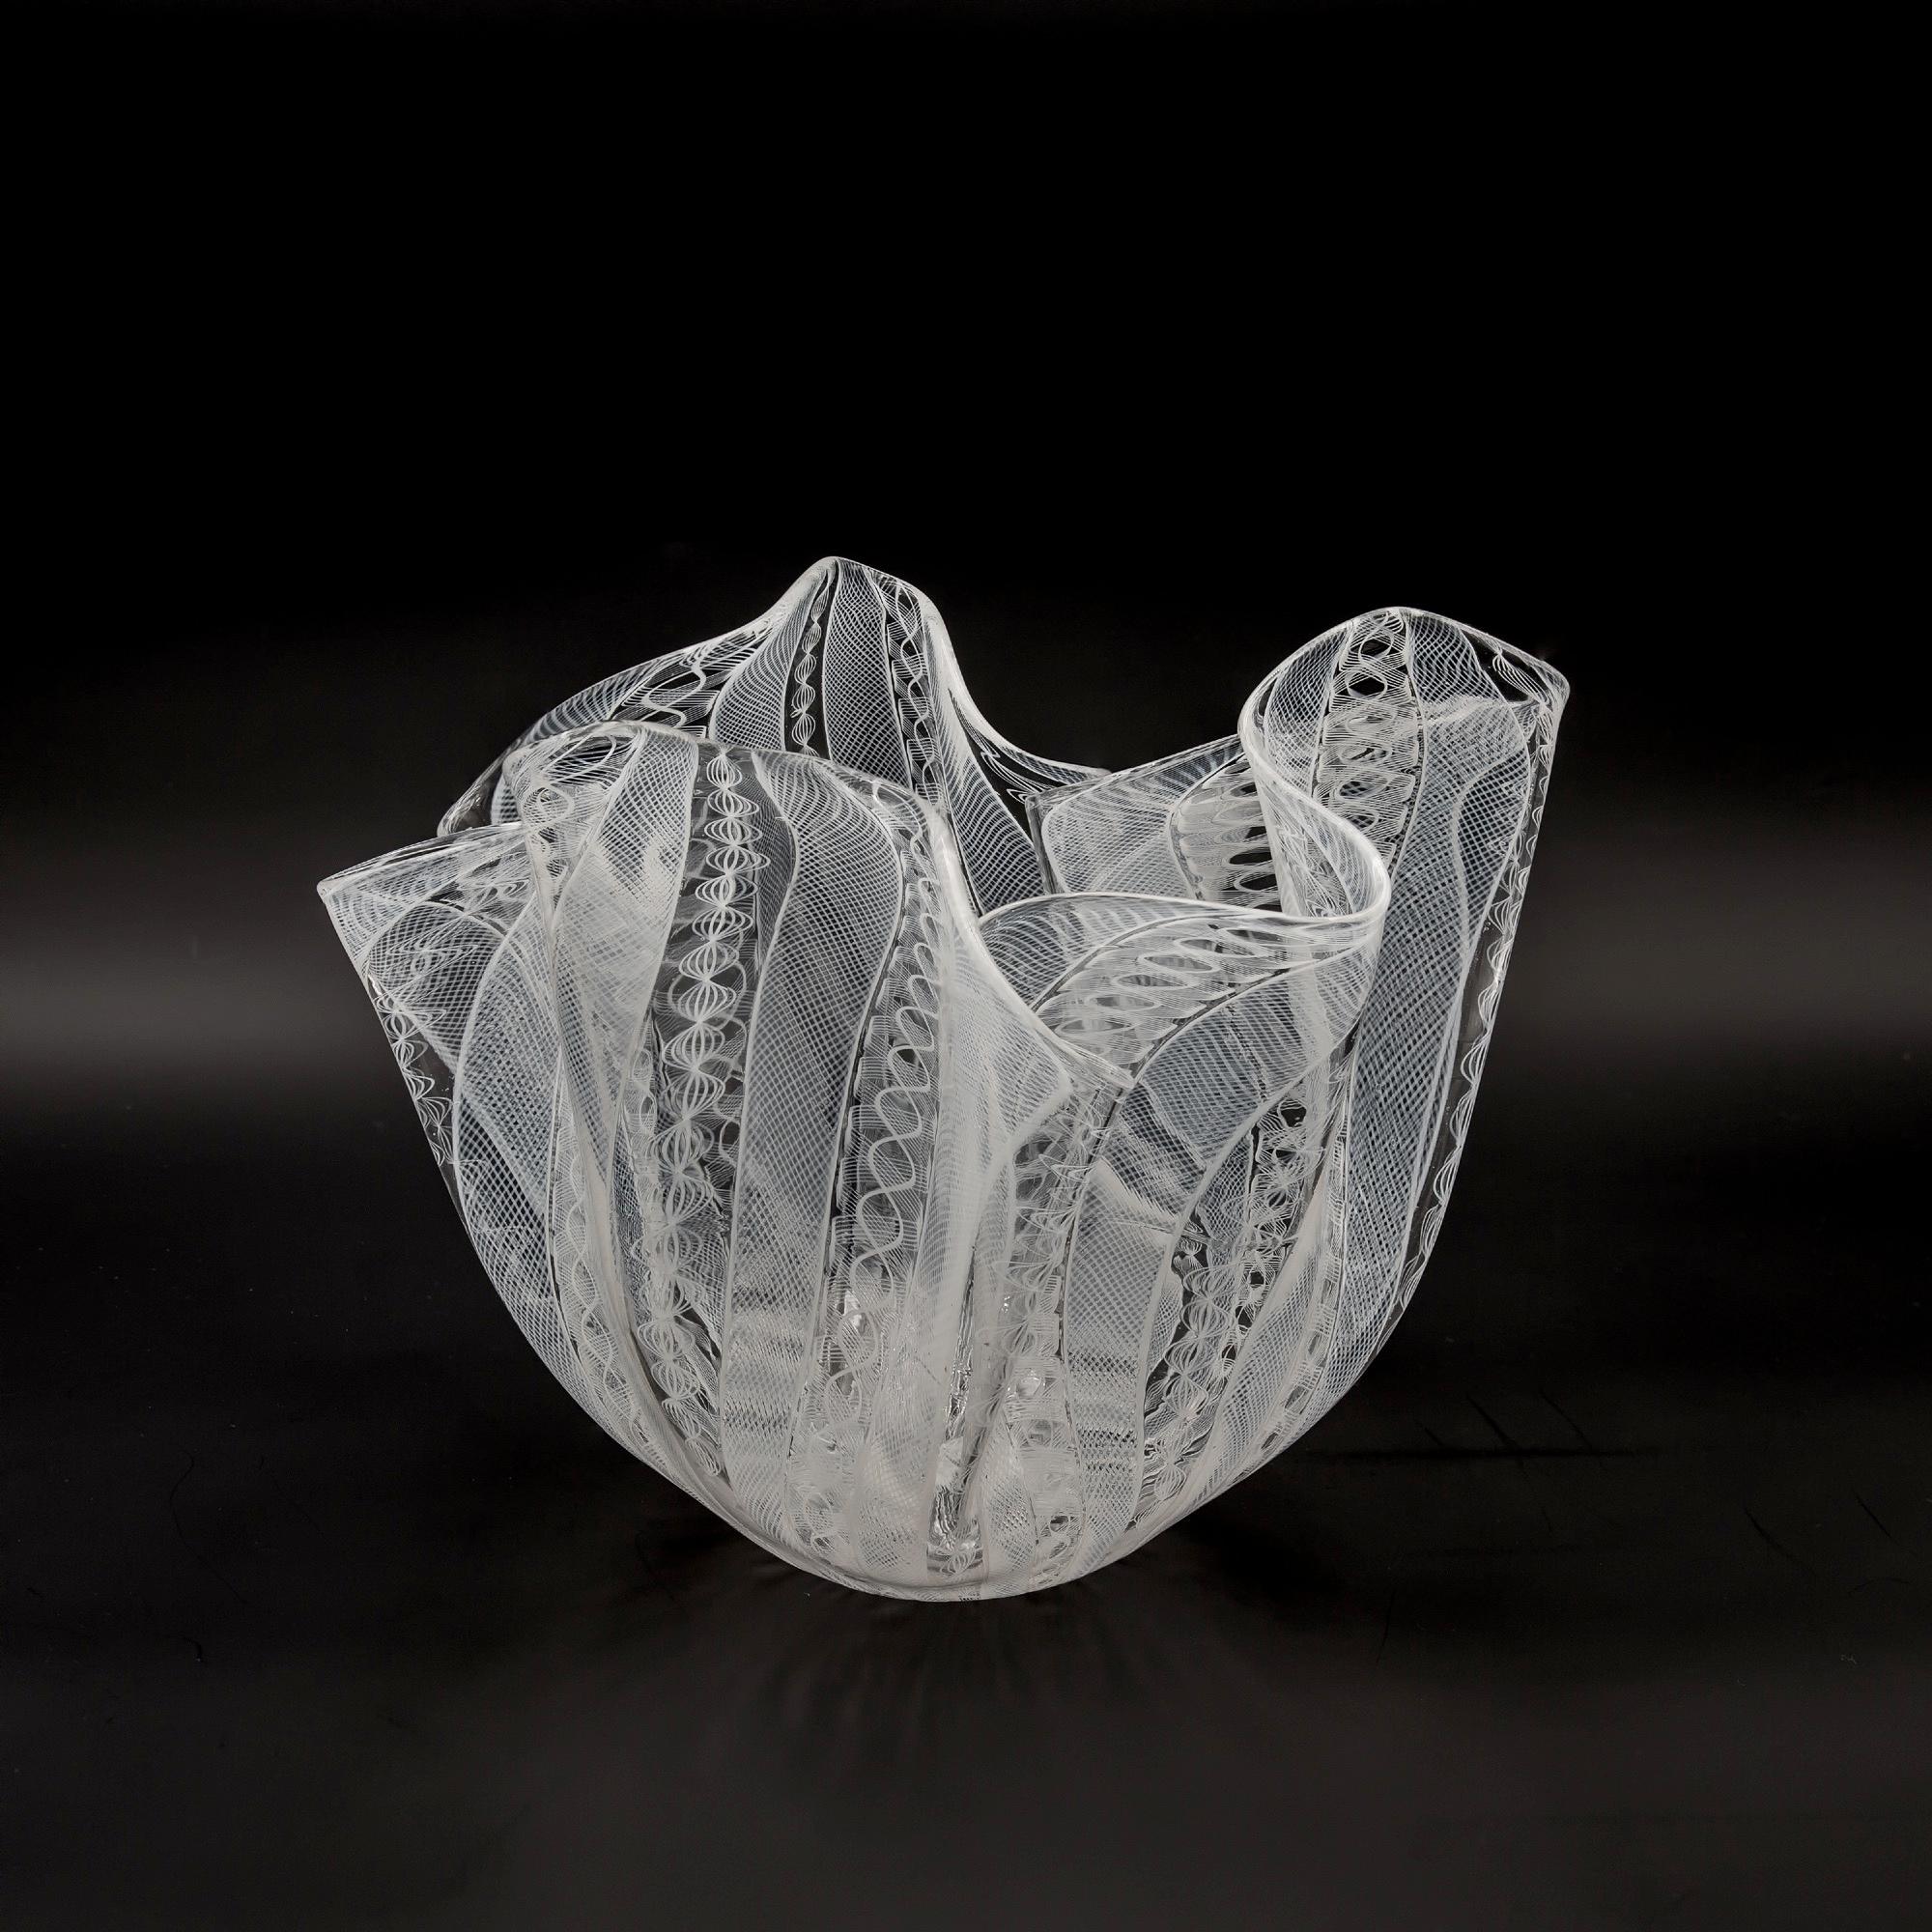 This is a vintage circa 1950 fazzoletto (handkerchief) vase designed by Fulvio Bianconi for Venini Murano in Italy.
The vase is made from transparent glass inserted by Zanfirico canes of white glass
The shape of old handkerchiefs vases by Venini